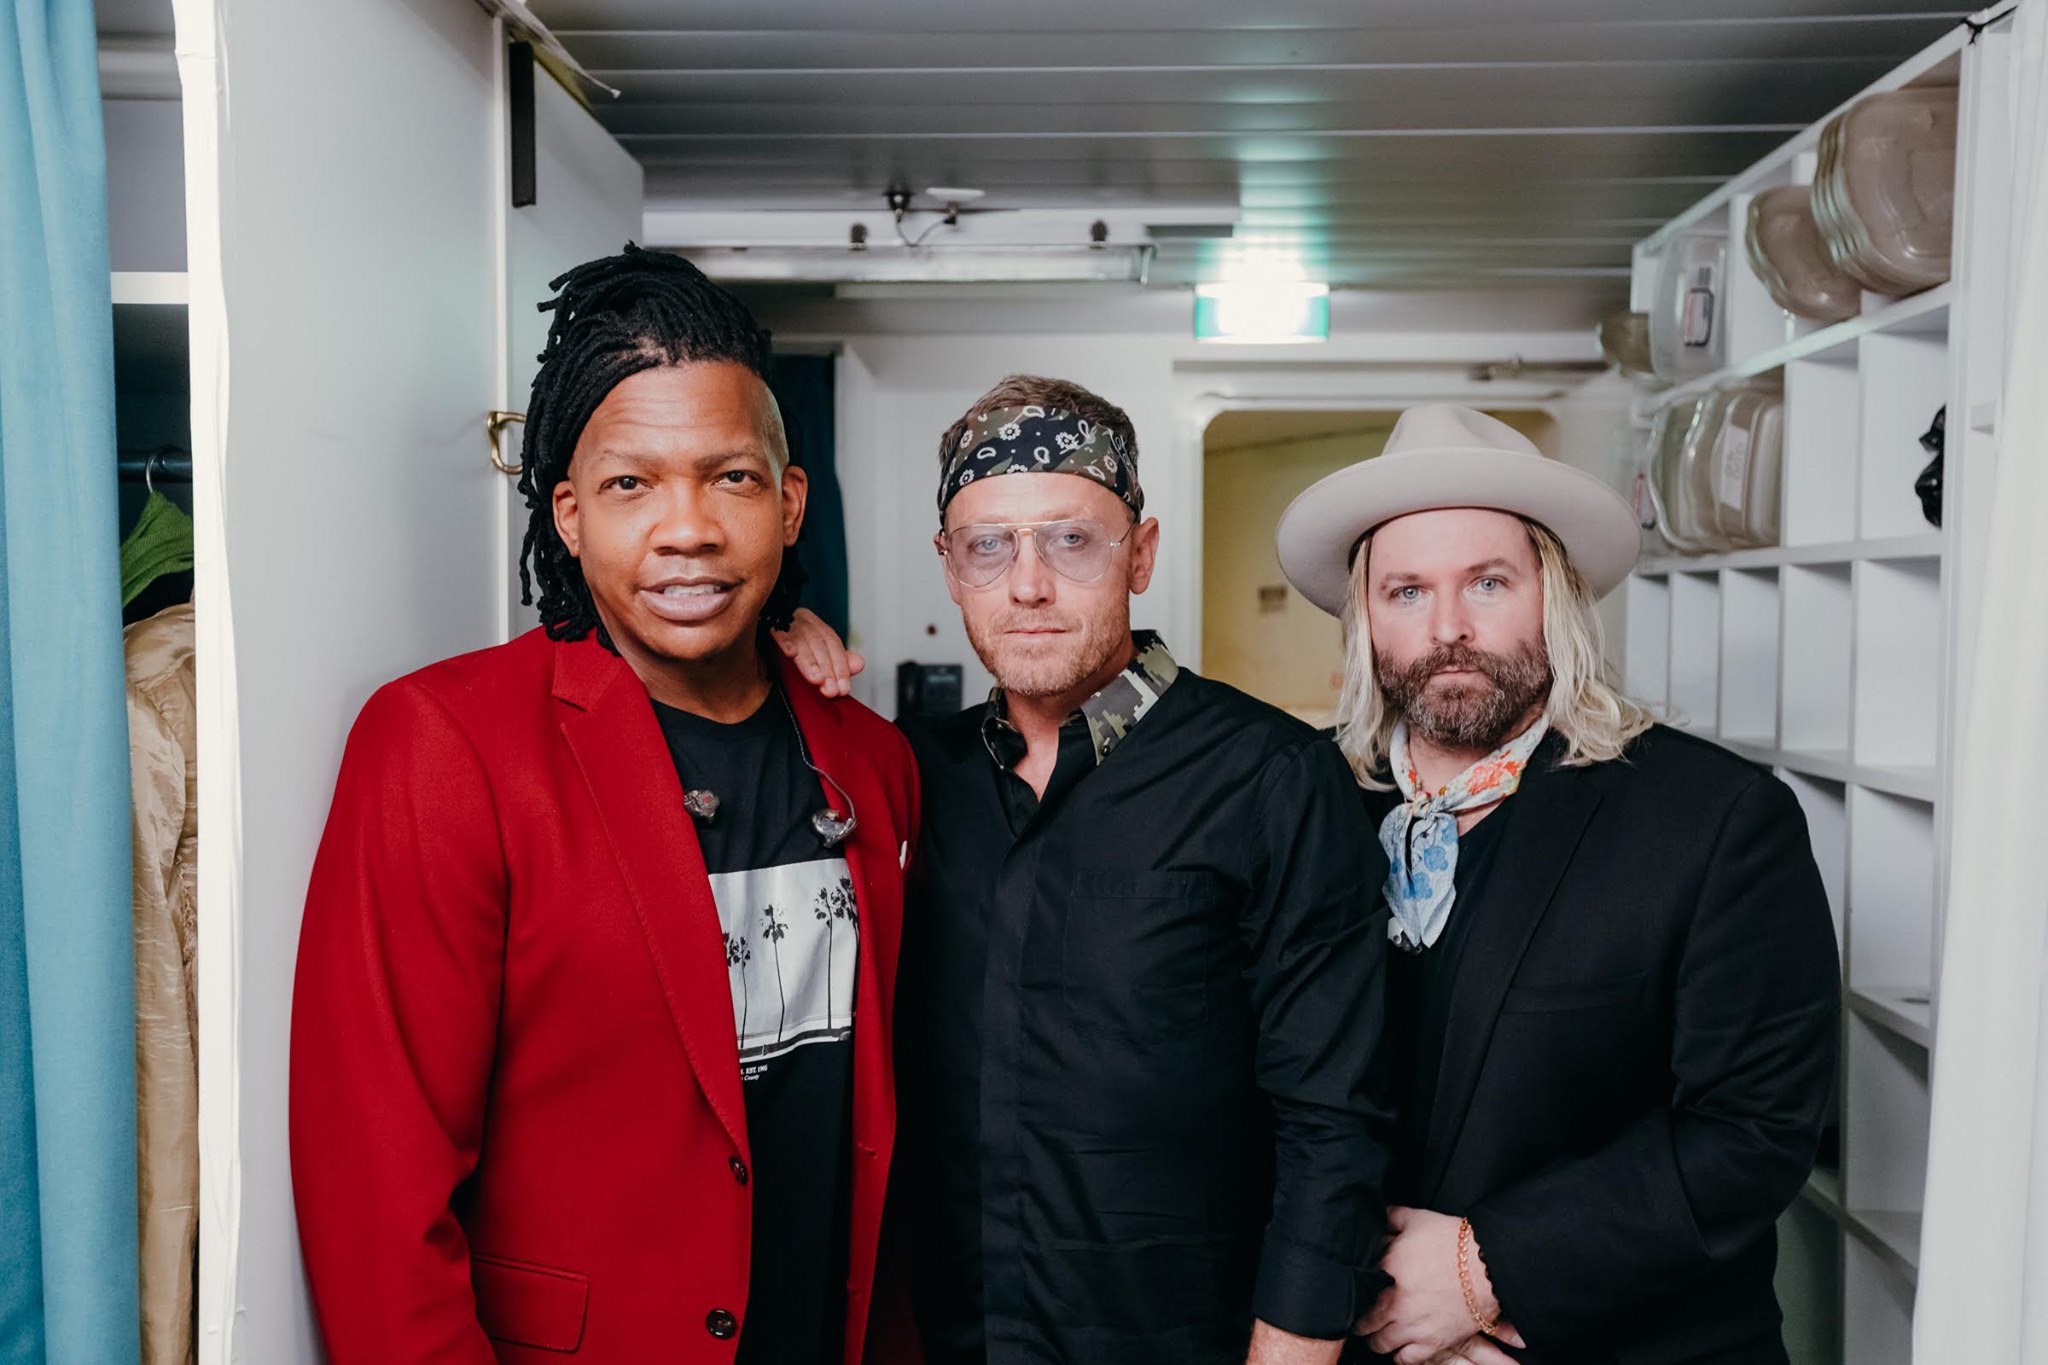 Michael Tait Announces dcTalk Will Start Touring Again In 2020